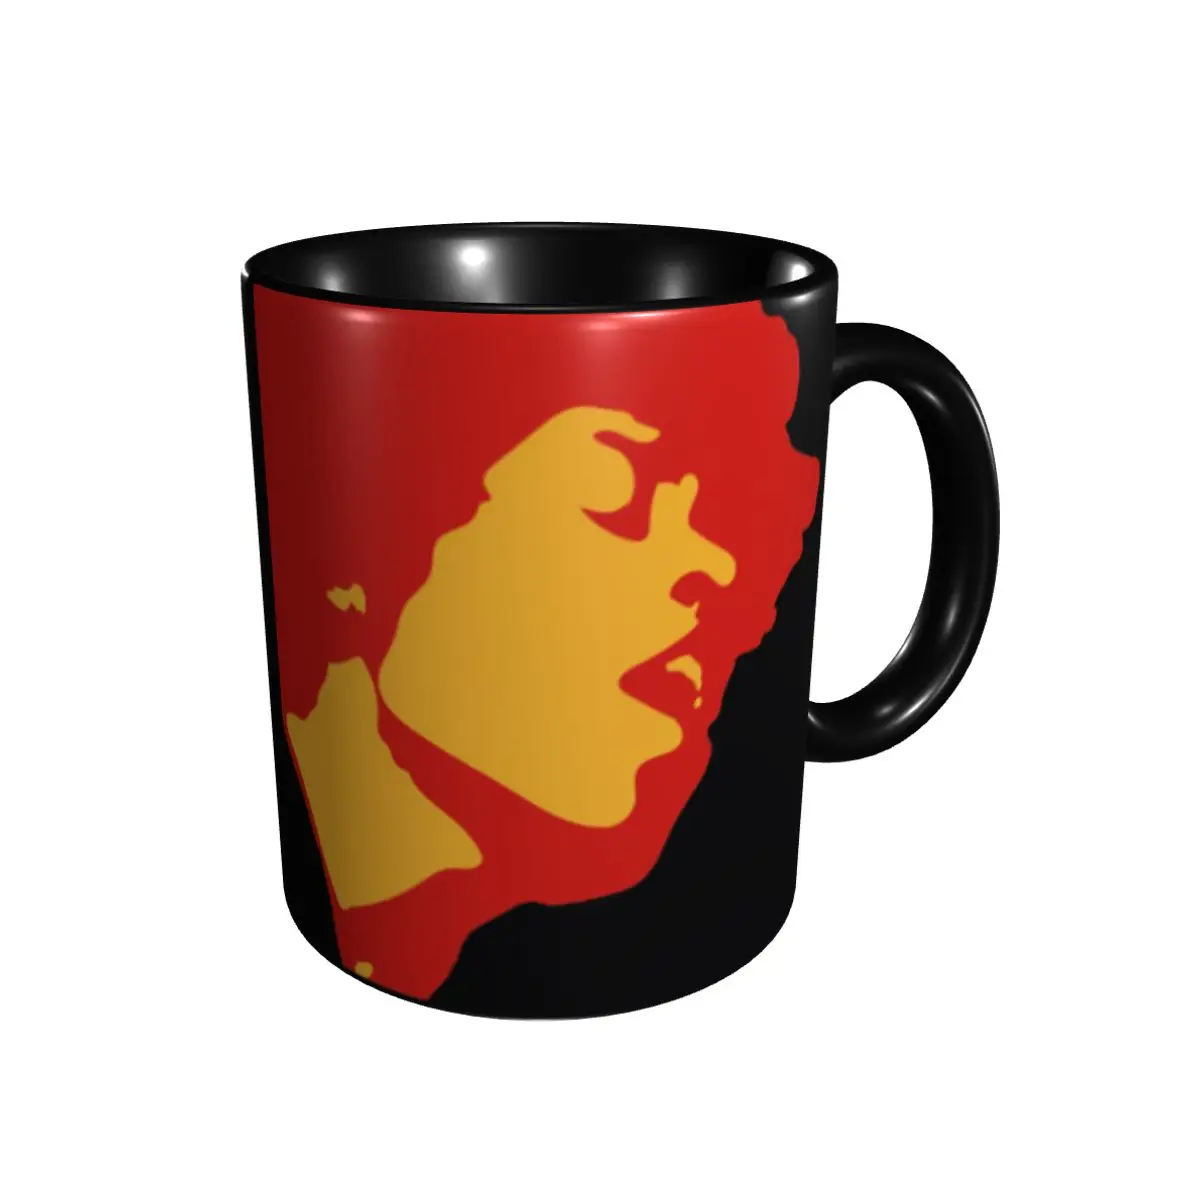 

Promo Jimi And Hendrix Electric Ladyland Essential Mugs Funny Cups Mugs Print Nerd R215 coffee cups